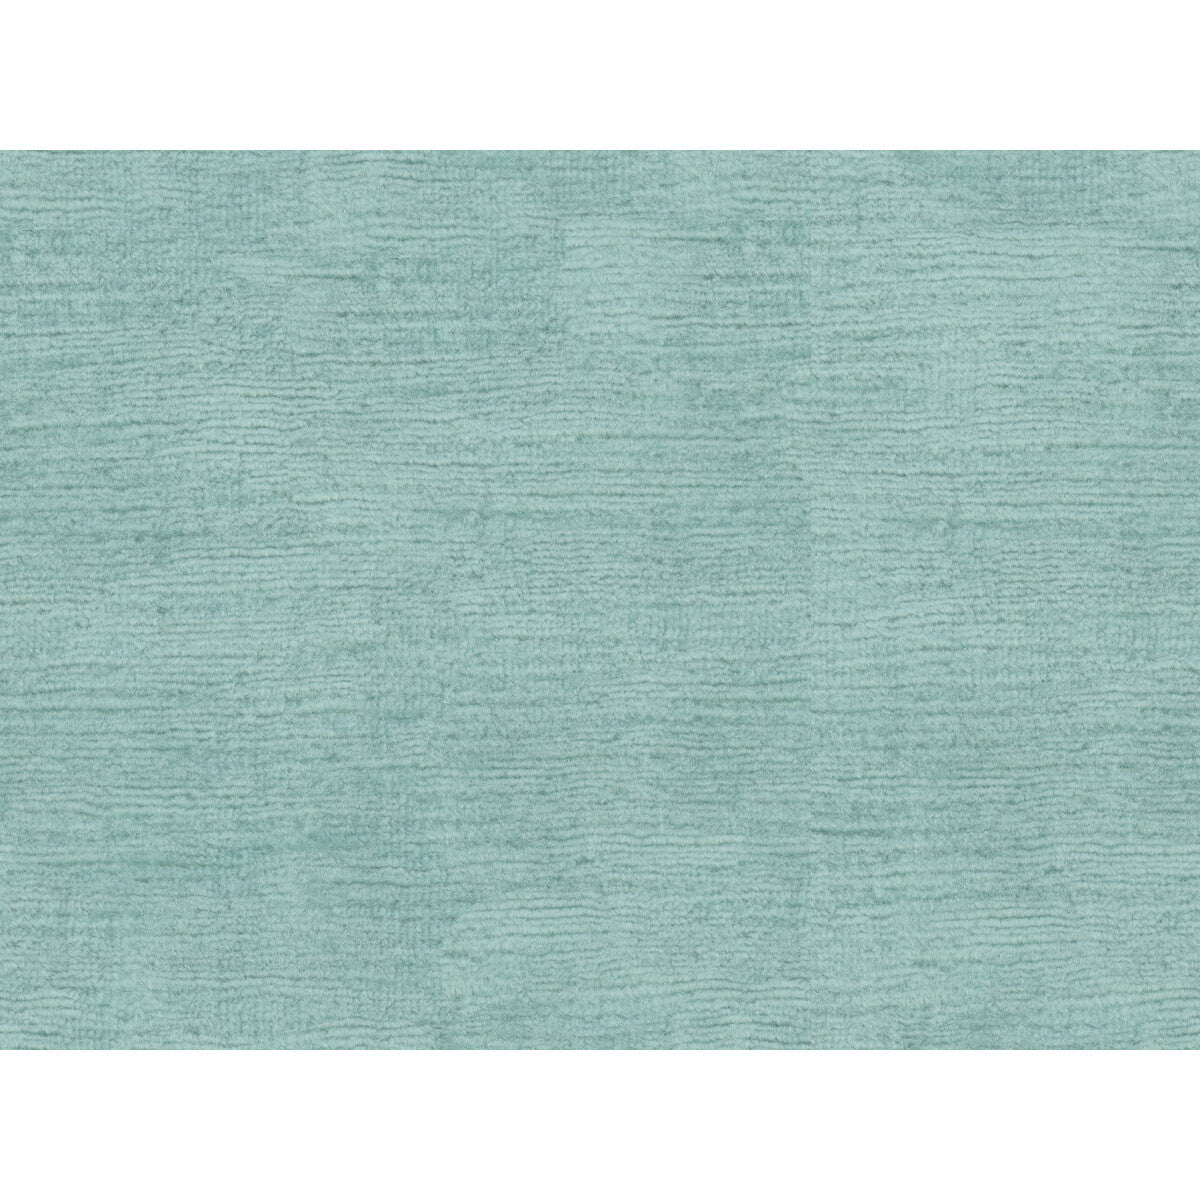 Fulham Linen V fabric in seaglass color - pattern 2016133.315.0 - by Lee Jofa